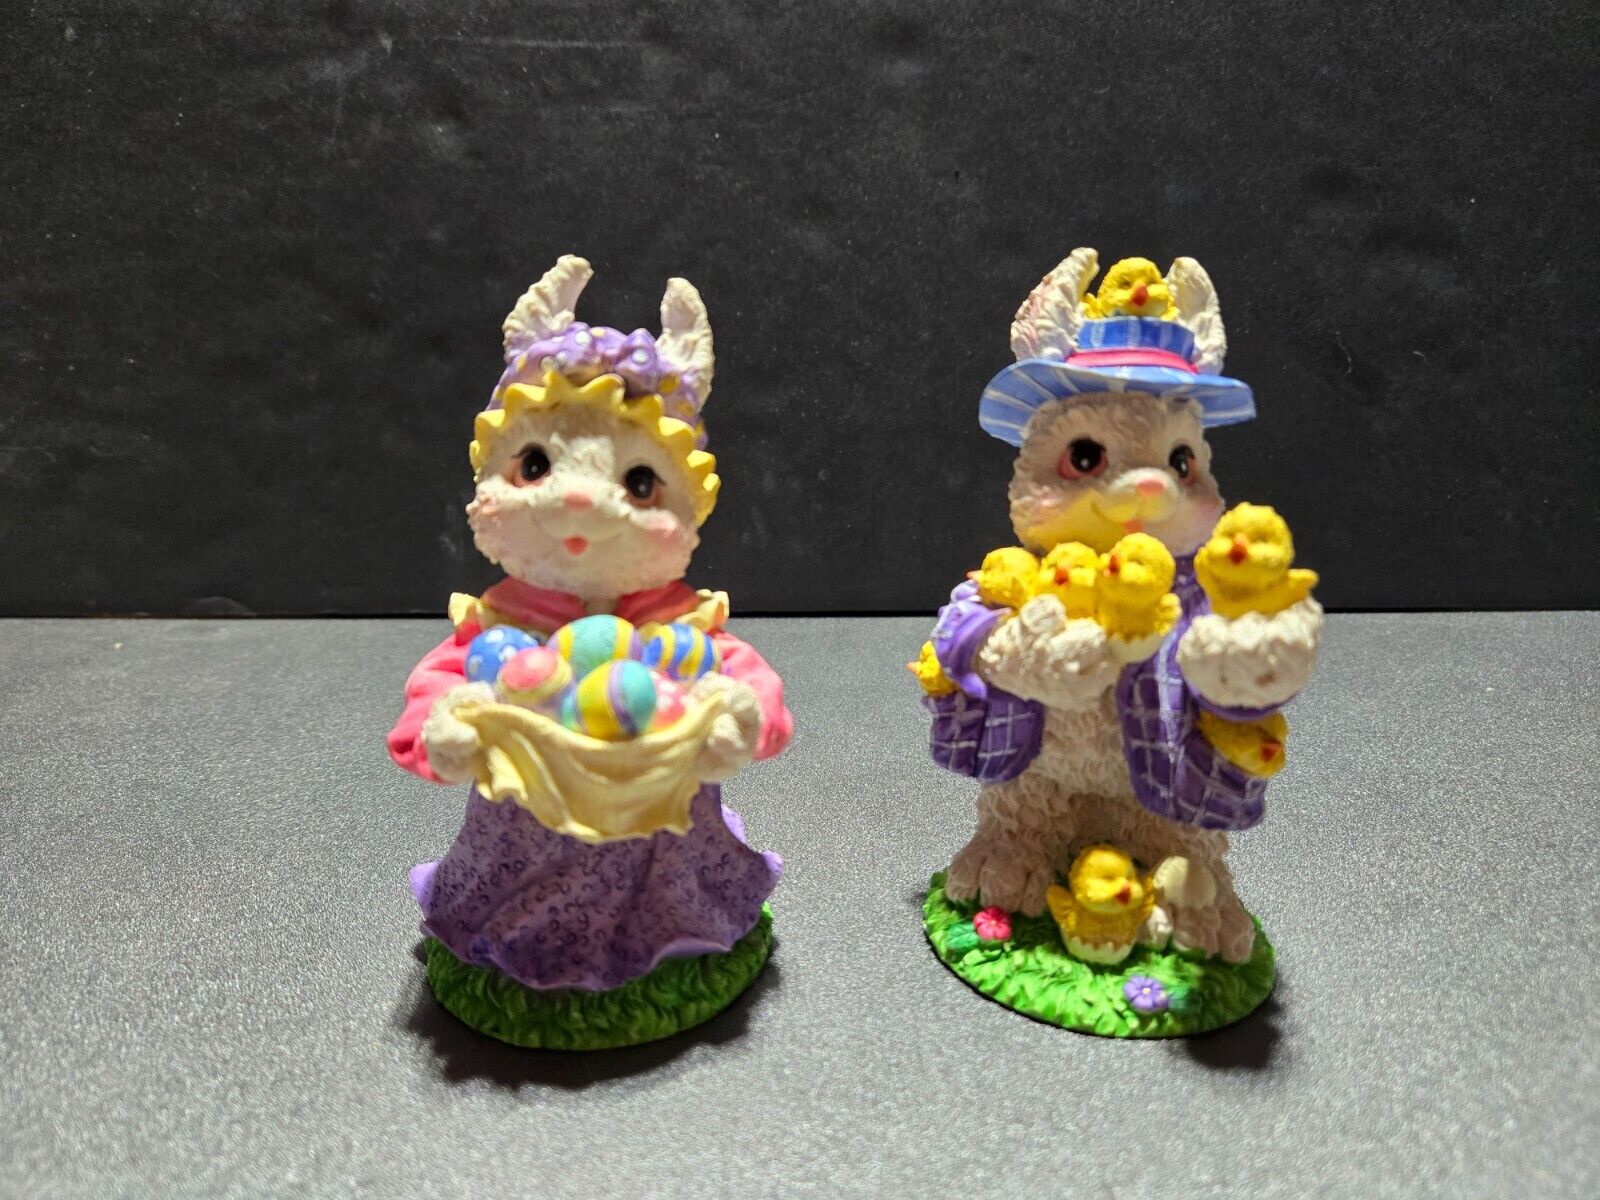 Exquisite Ornate Easter Bunny Figurines, 